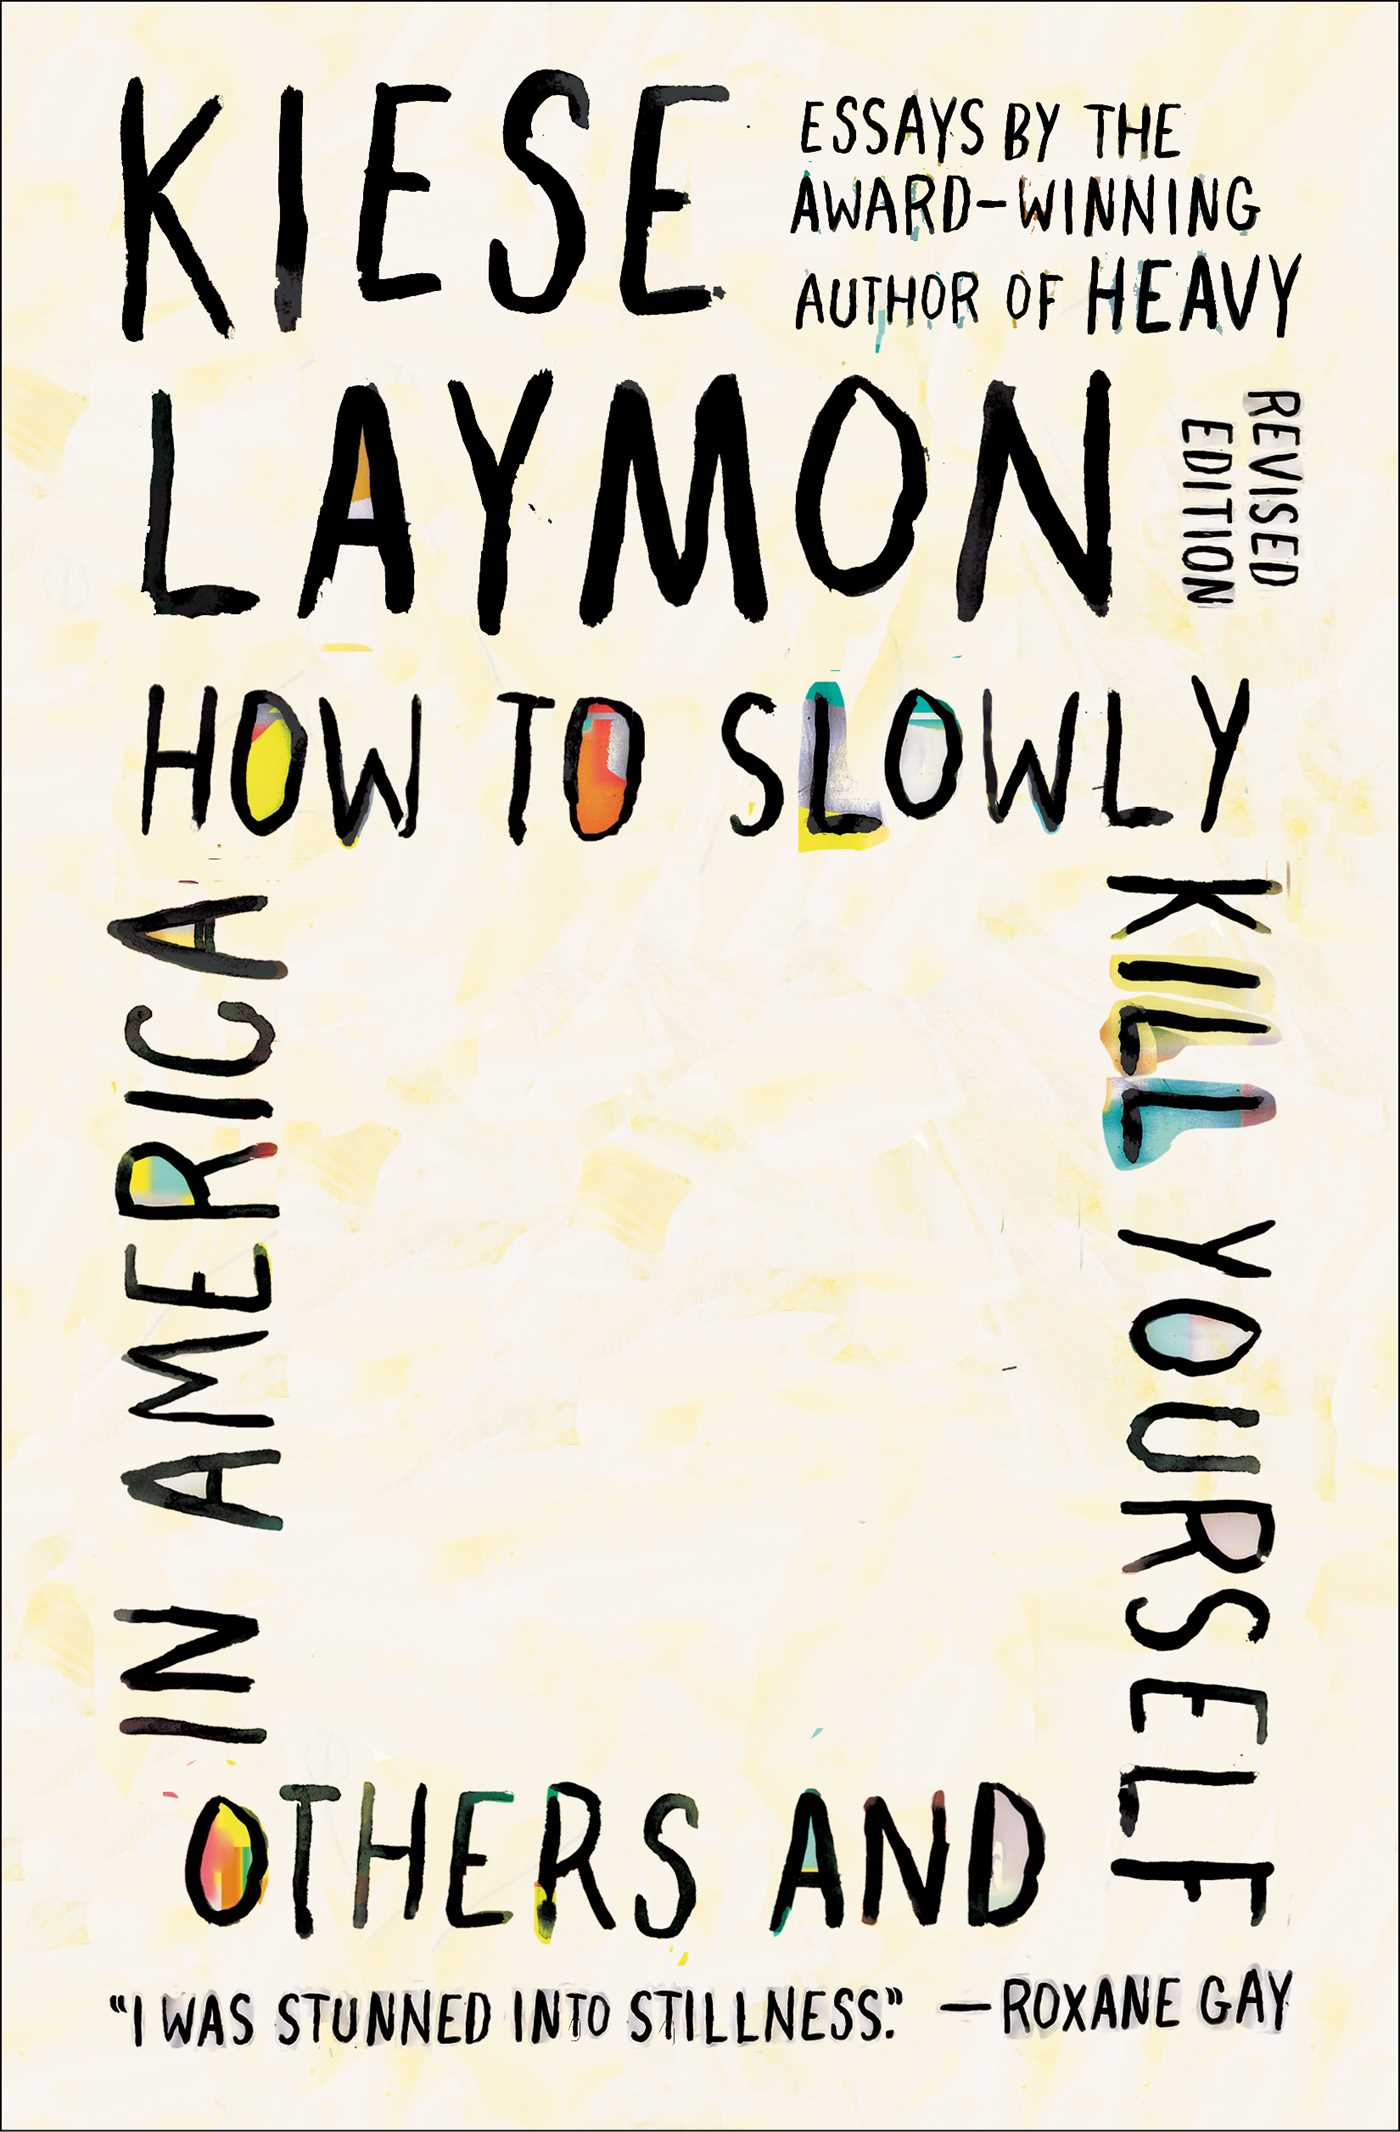 How to Slowly Kill Yourself and Others in America by Kiese Laymon.